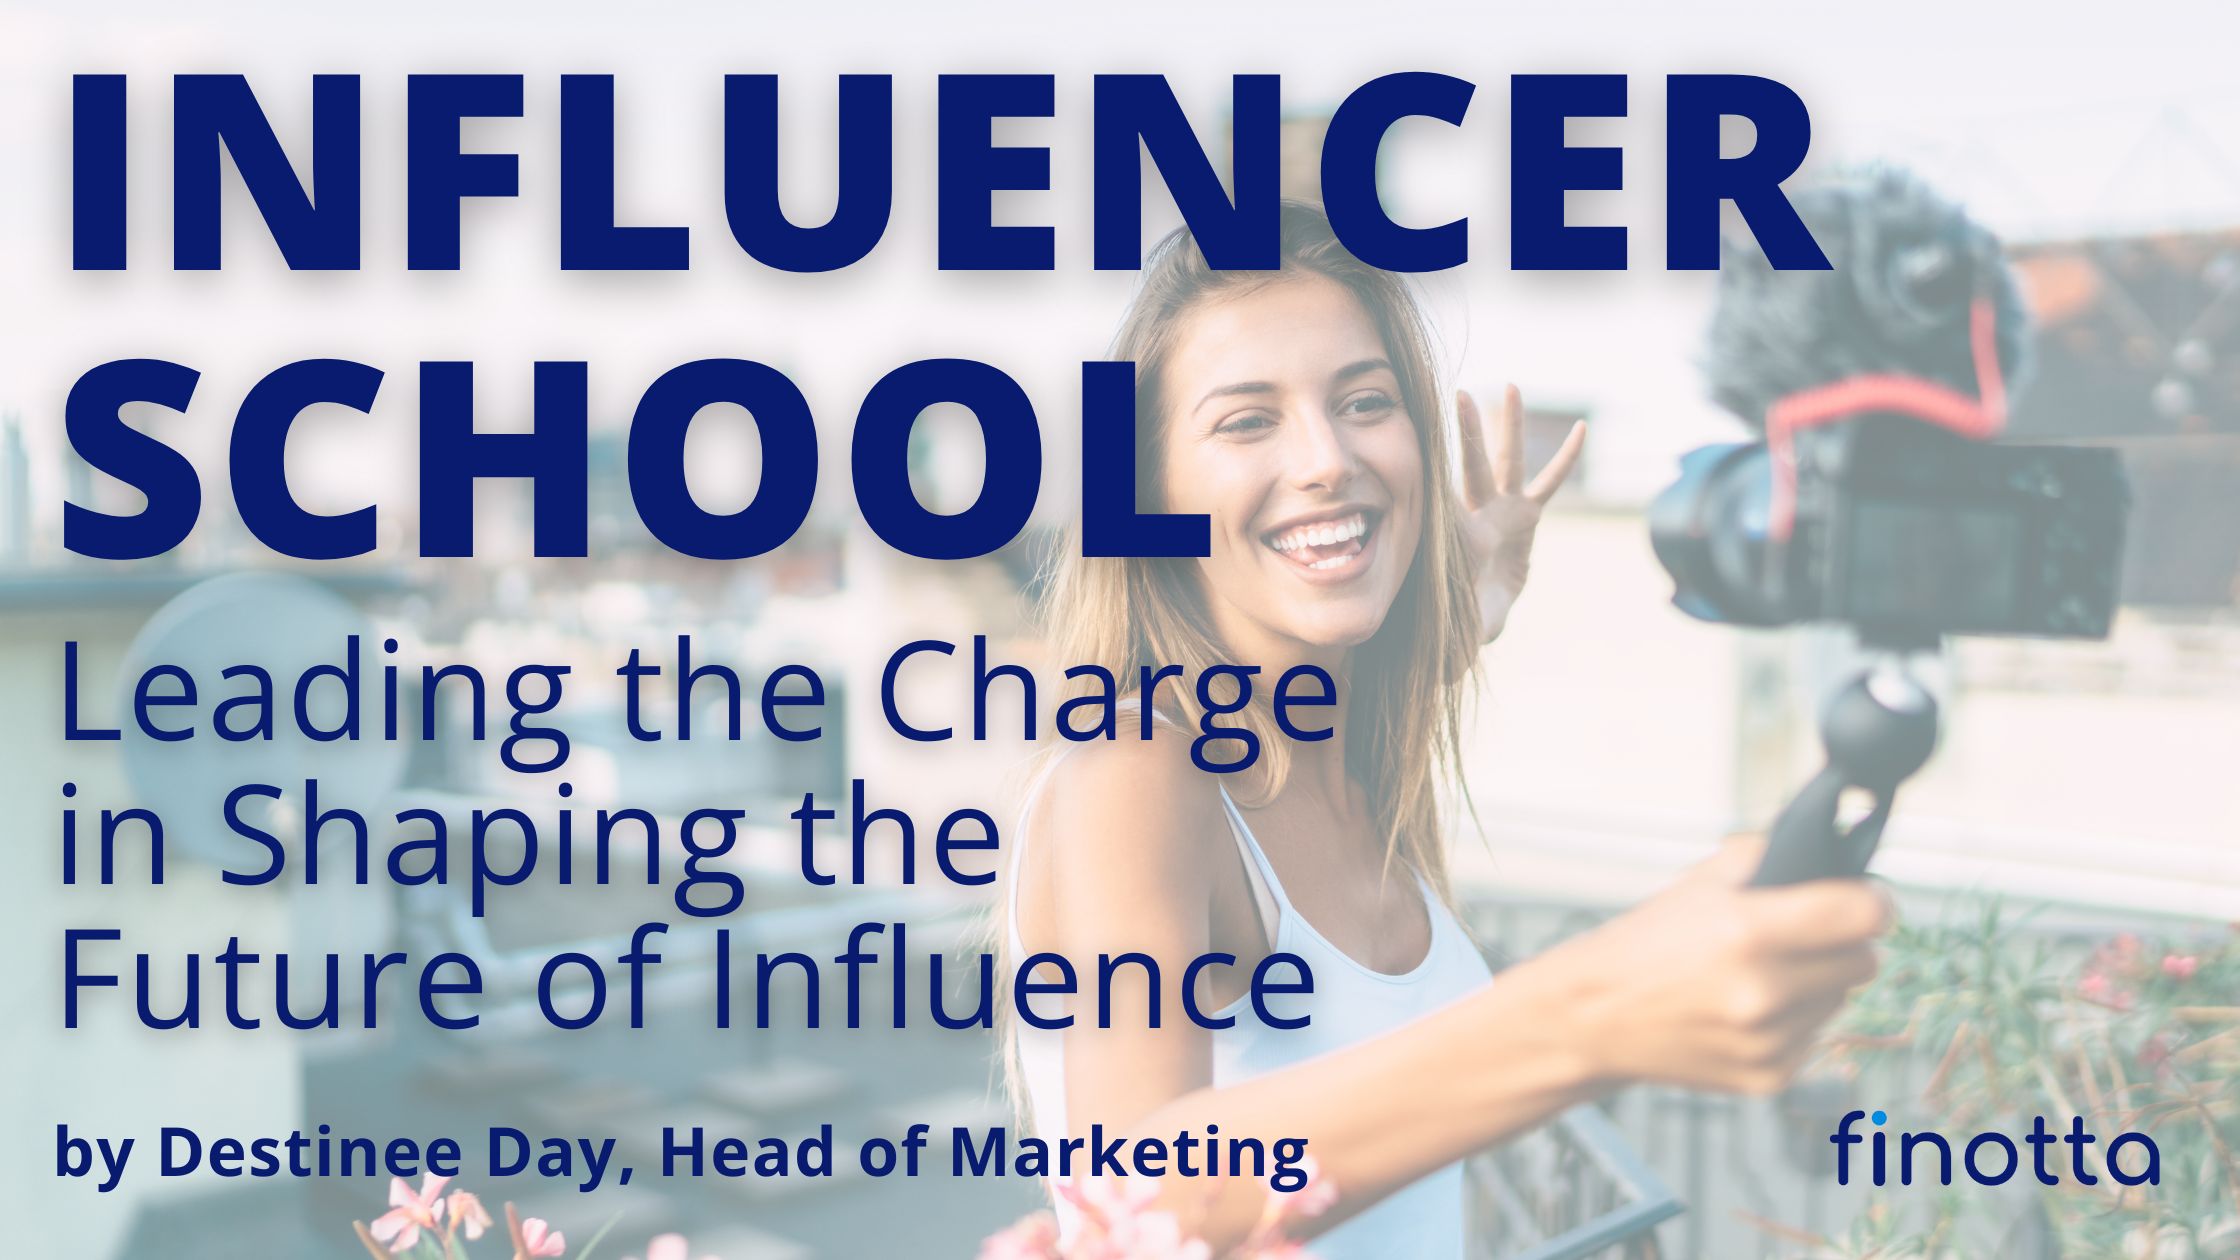 Influencer School: Leading the Charge in Shaping the Future of Influence